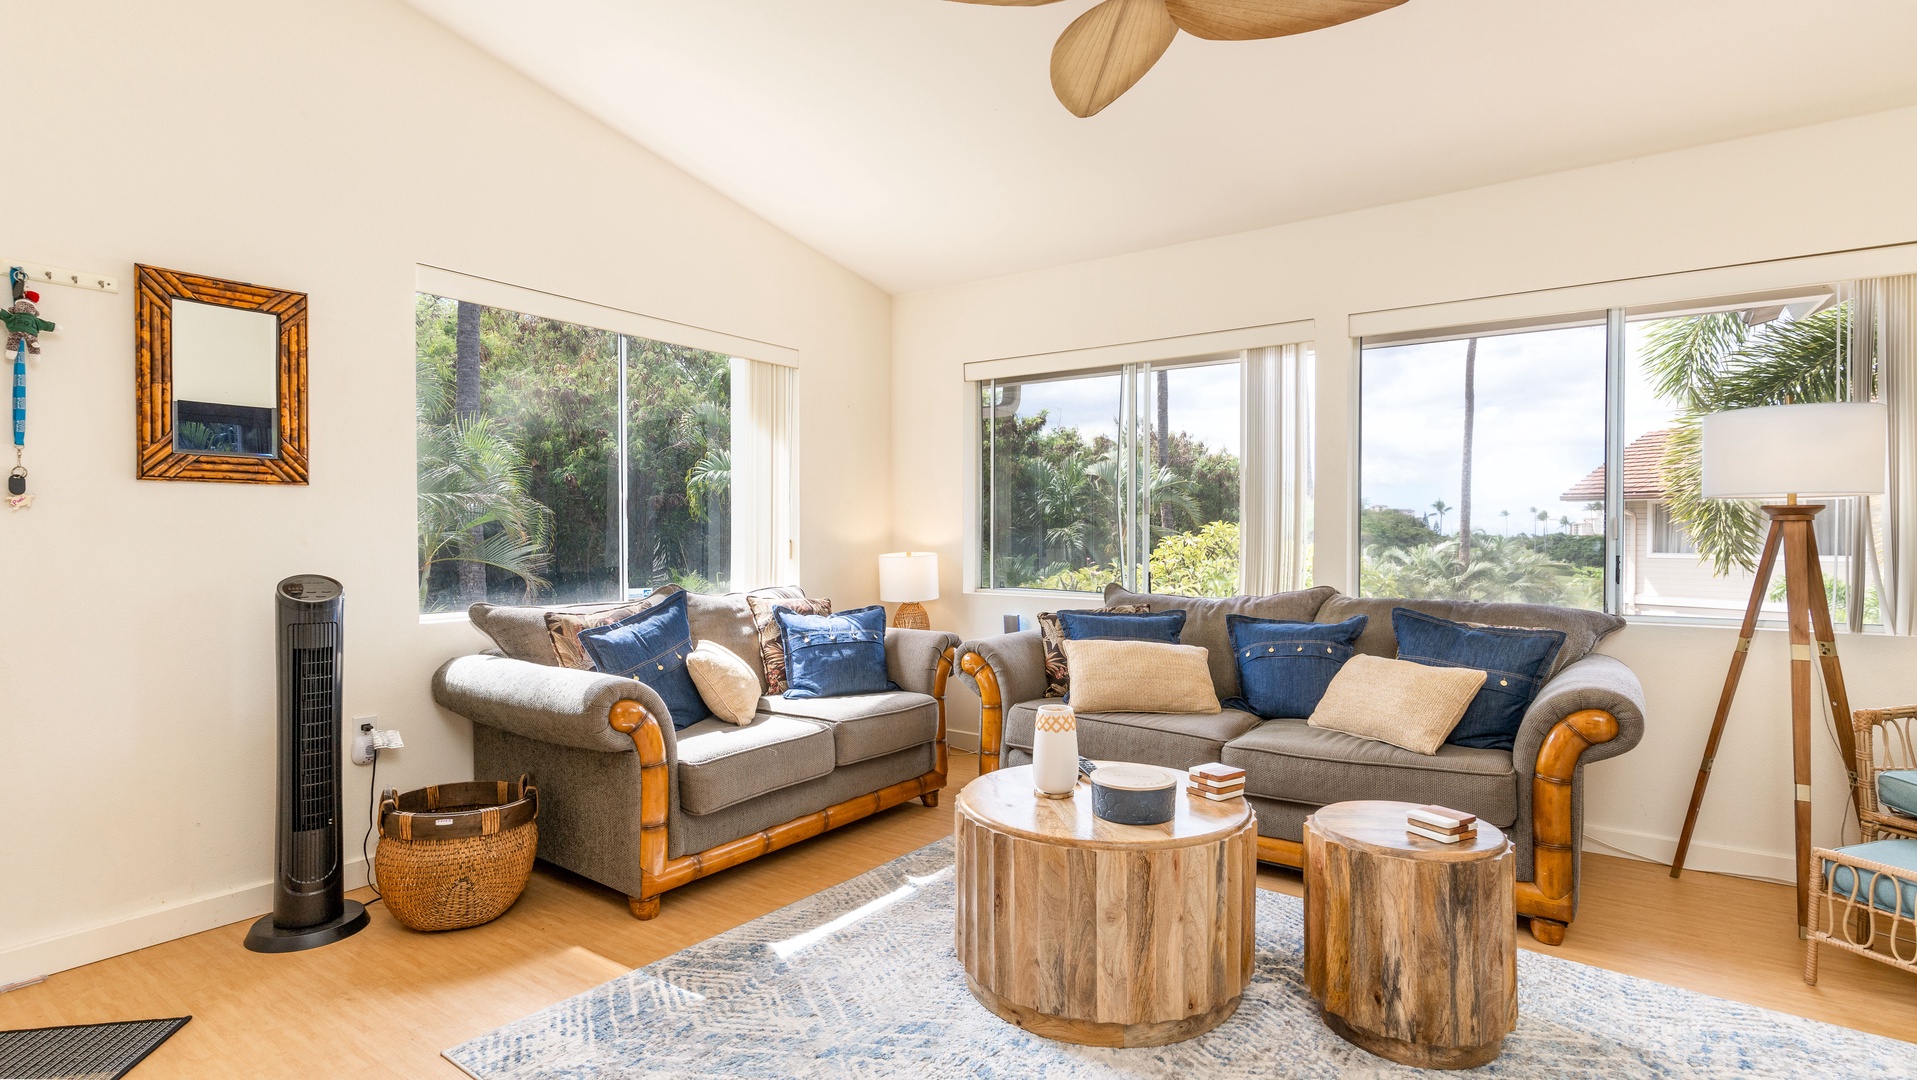 Kapolei Vacation Rentals, Fairways at Ko Olina 4A - The open living area is comfortably appointed with natural lighting.